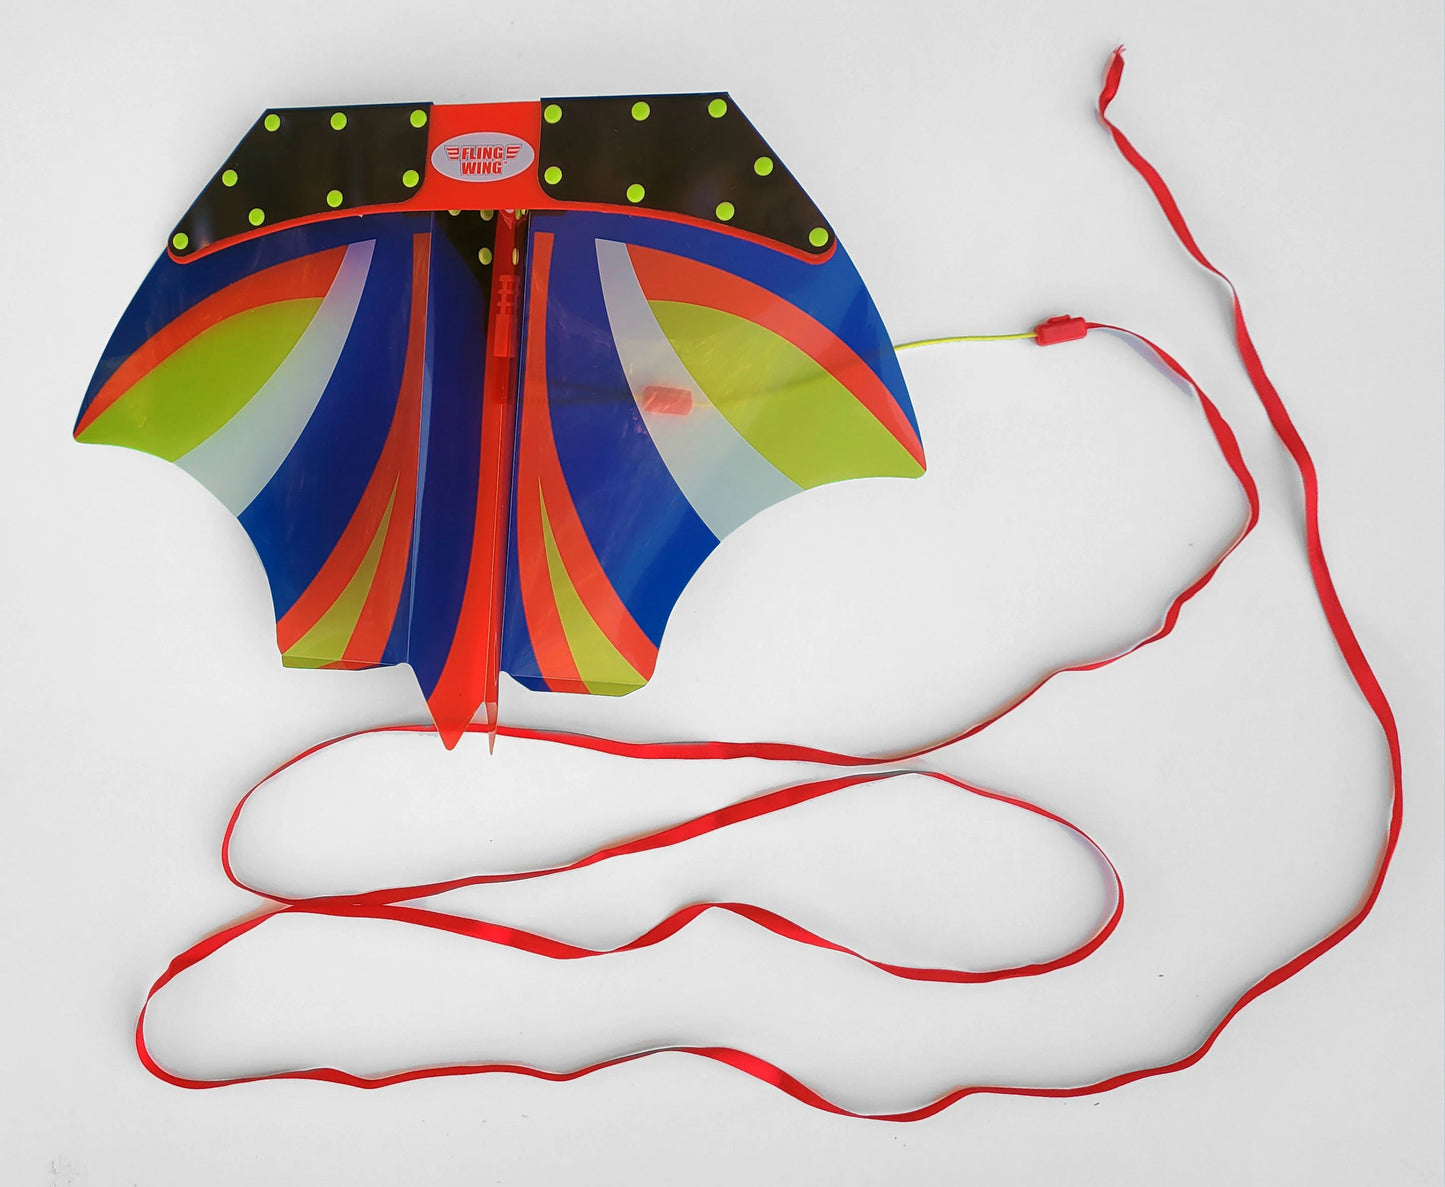 Fling Wing ultralight stunt flyer outdoor toy play catch 